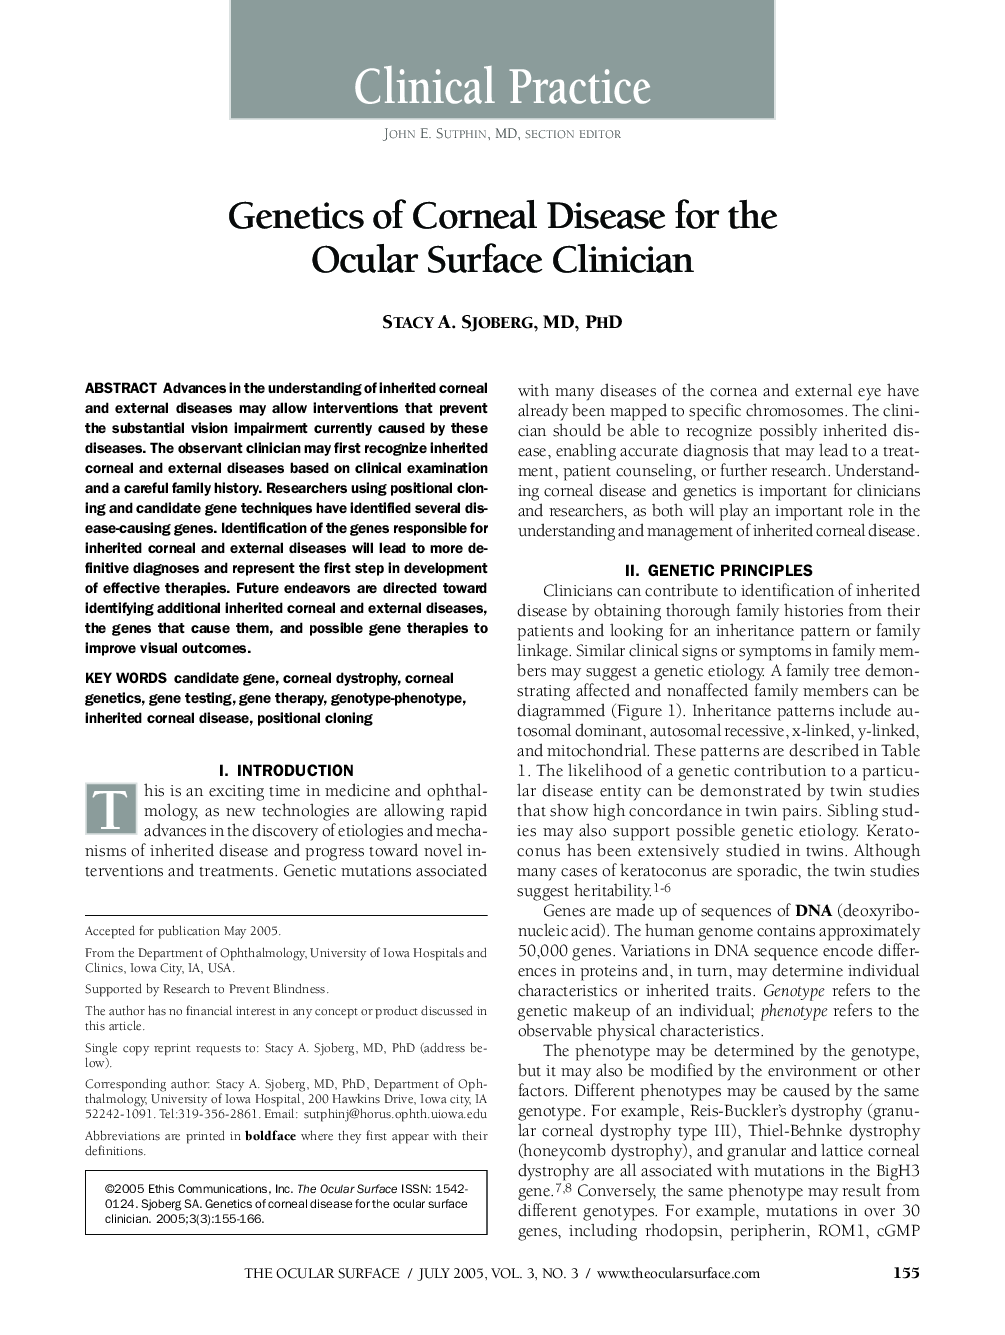 Genetics of Corneal Disease for the Ocular Surface Clinician